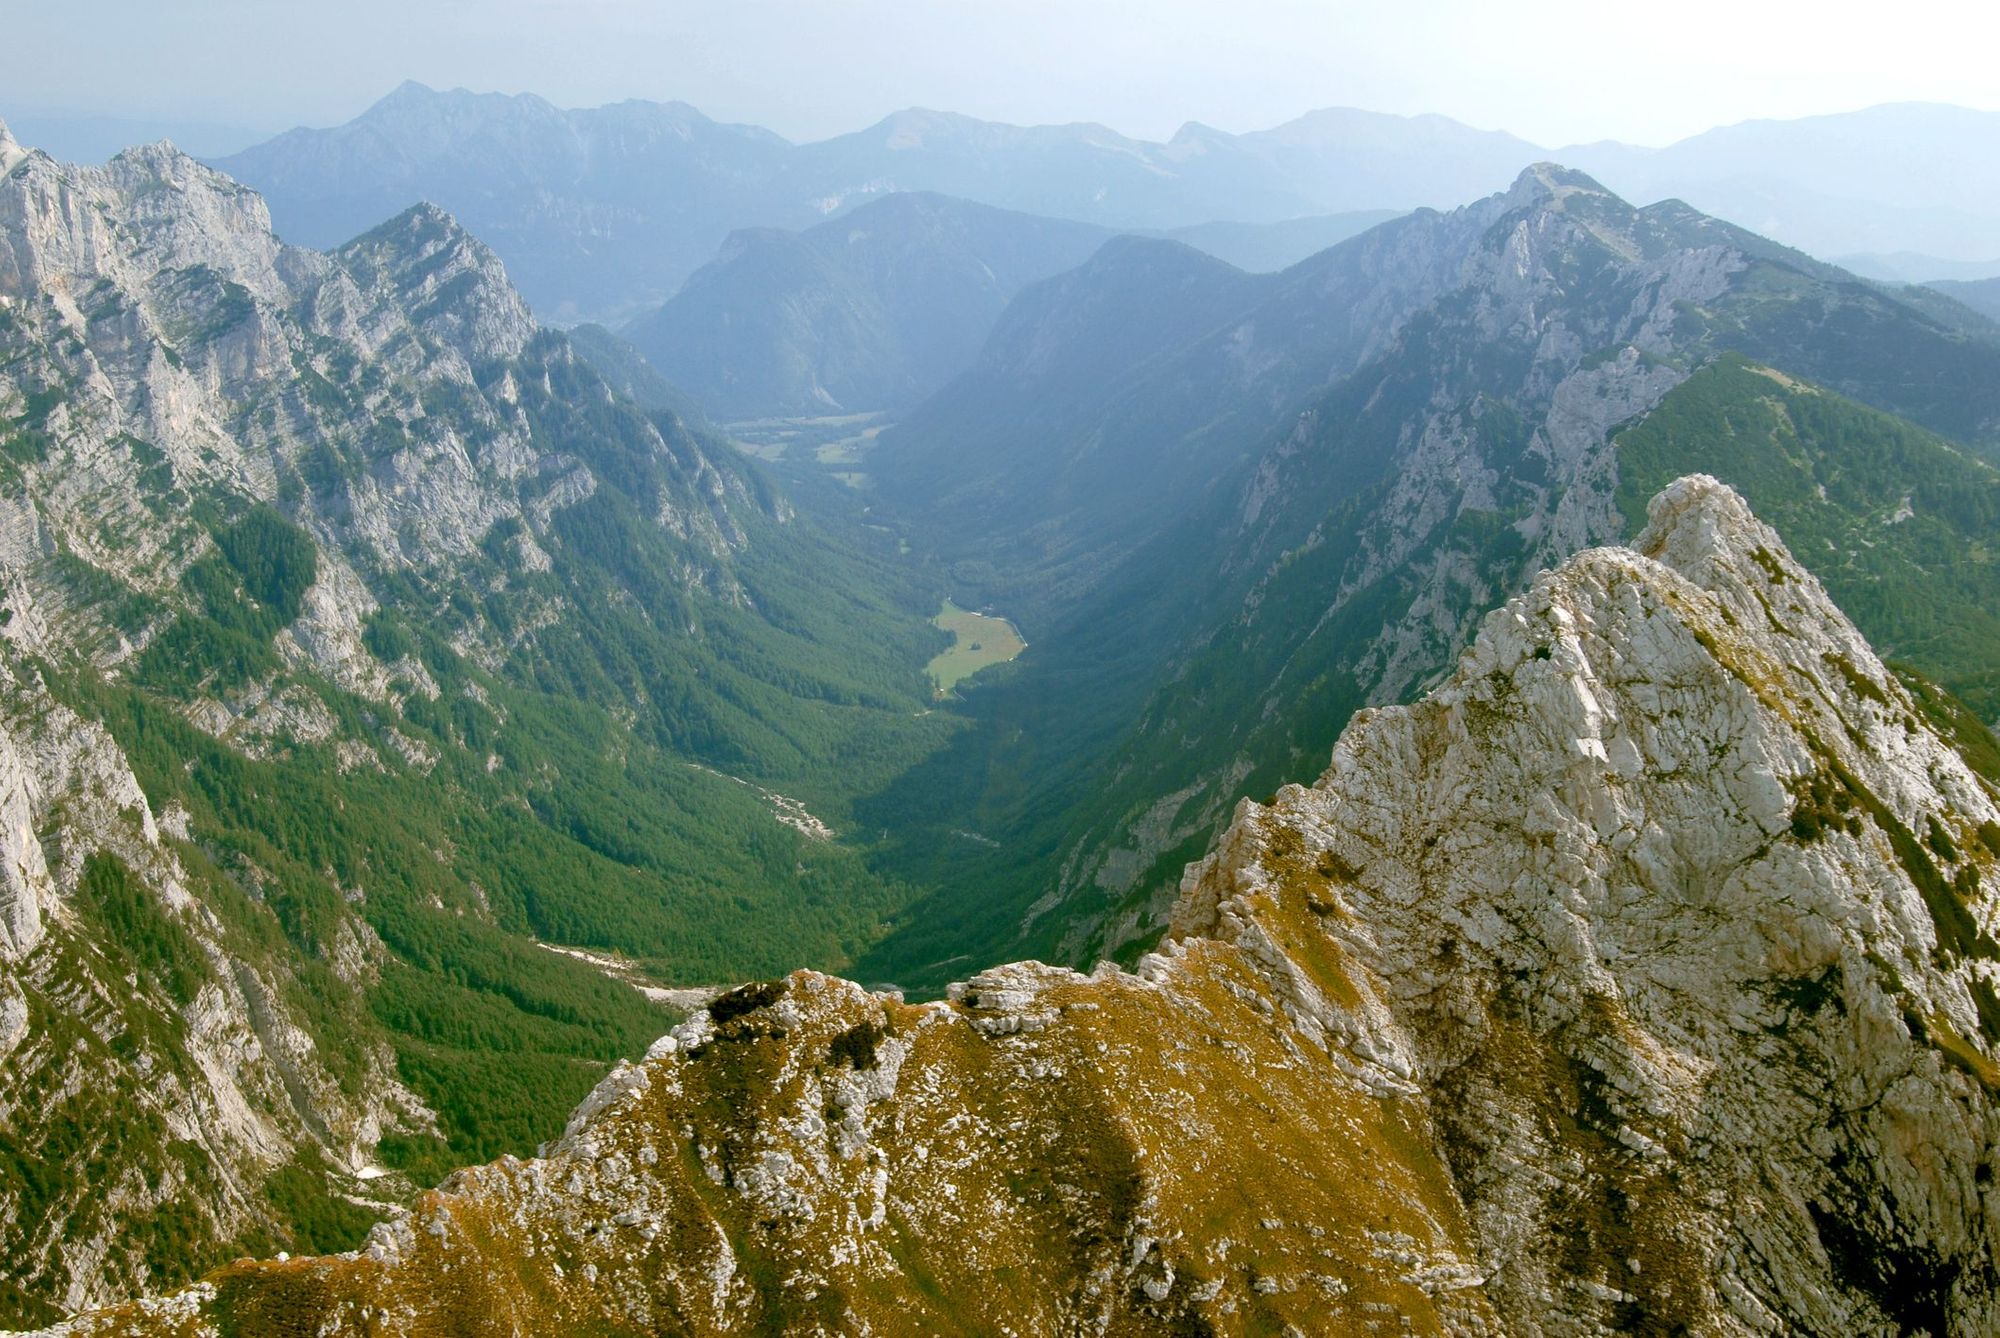 Panoramic view of Krma Valley, in Slovenia's Julian Alps